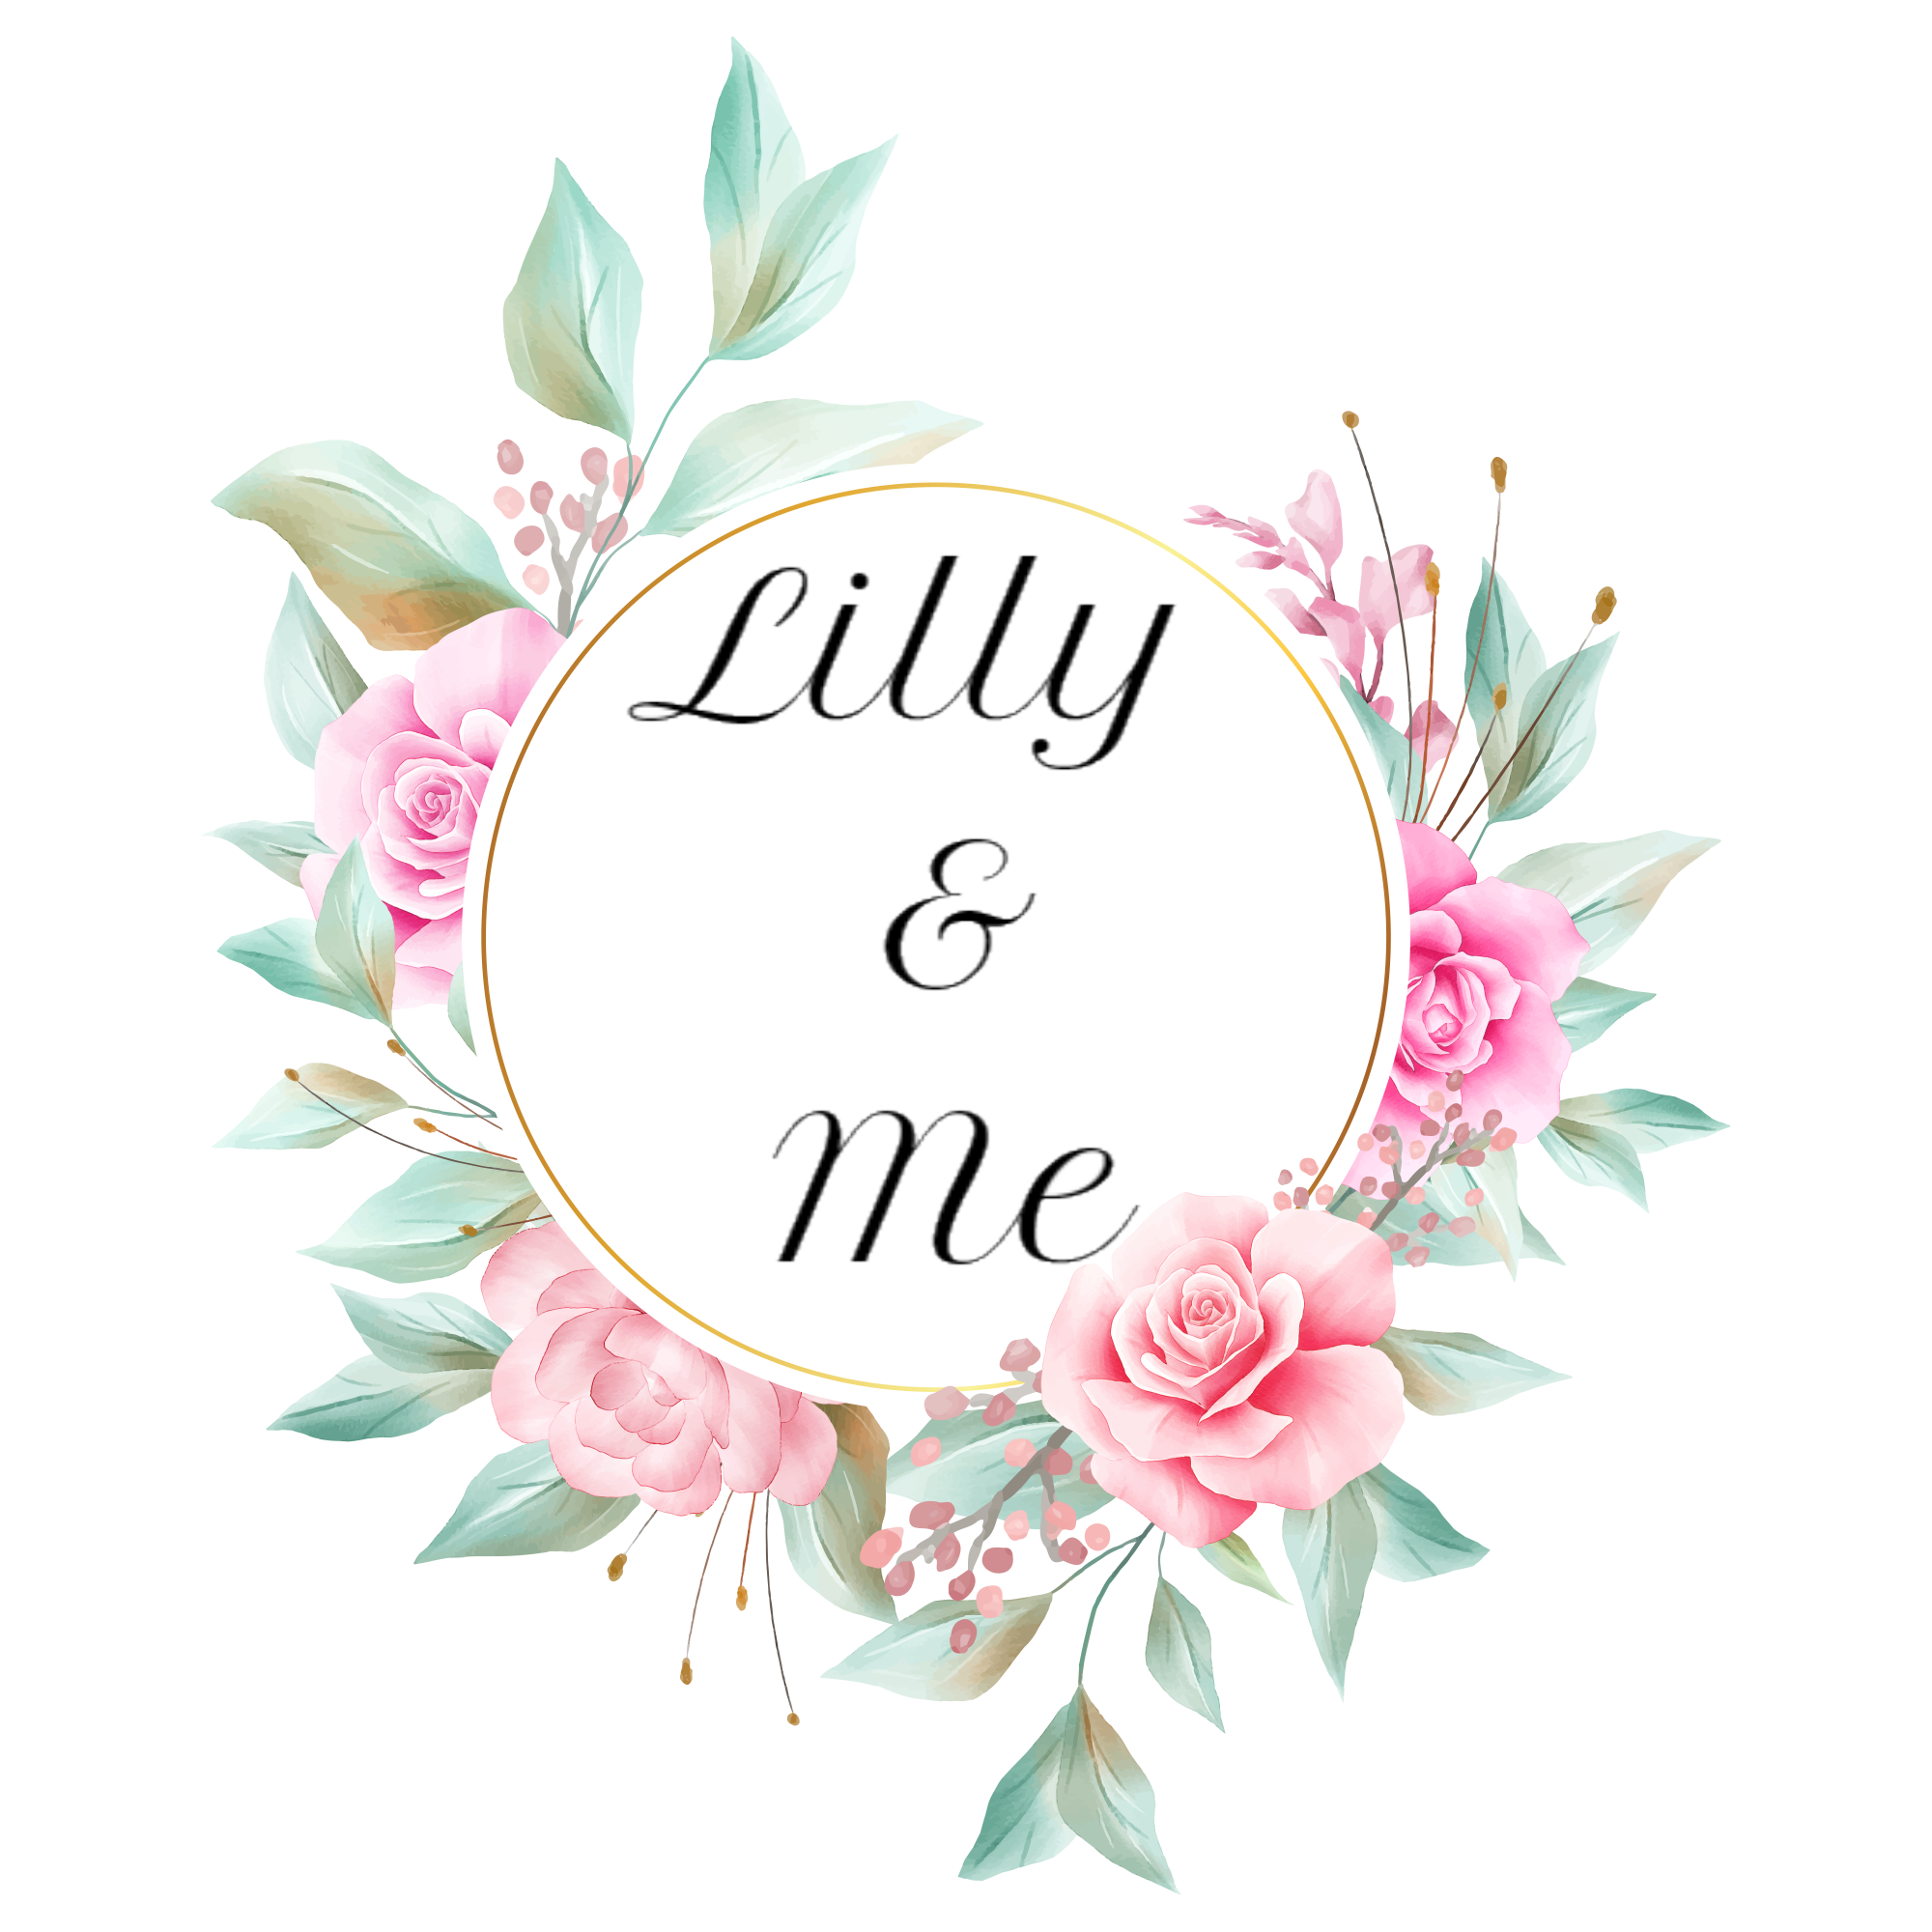 Lilly & Me